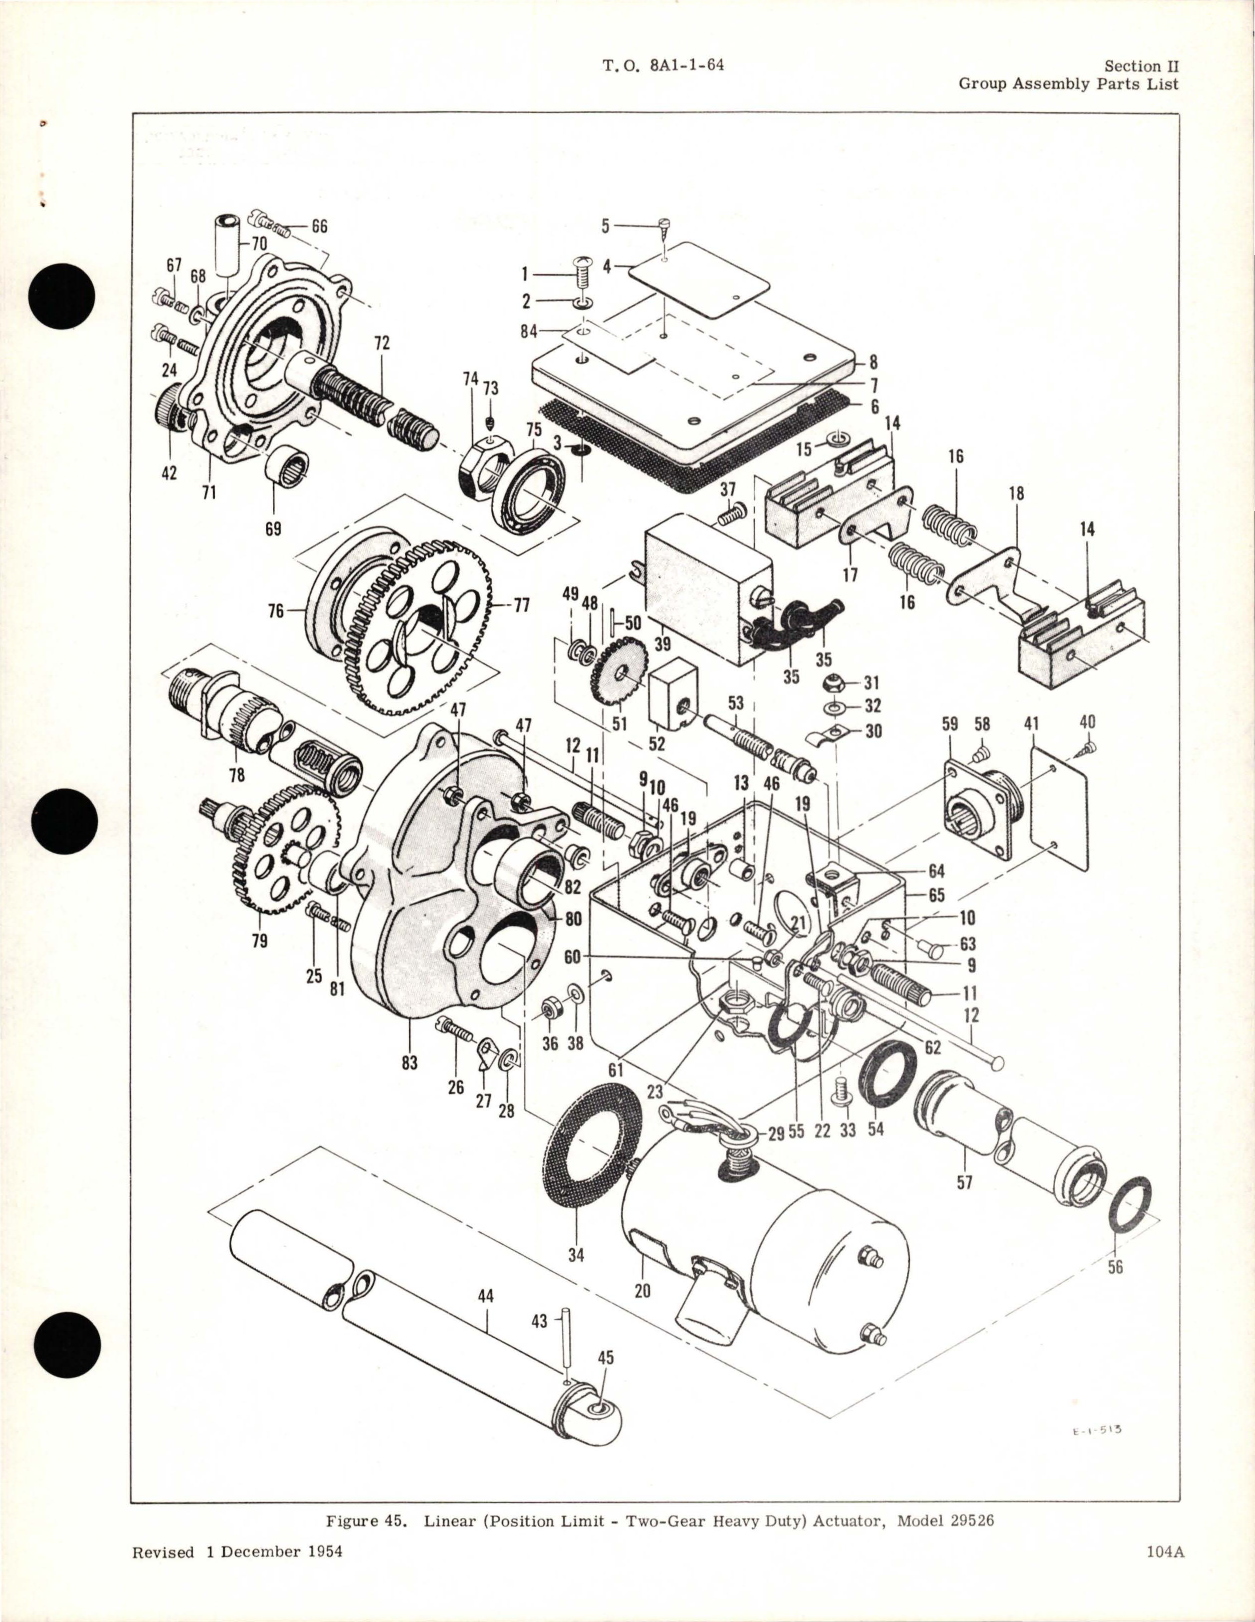 Sample page 5 from AirCorps Library document: Electric Motor-Driven Actuators Linear and Rotary Torque